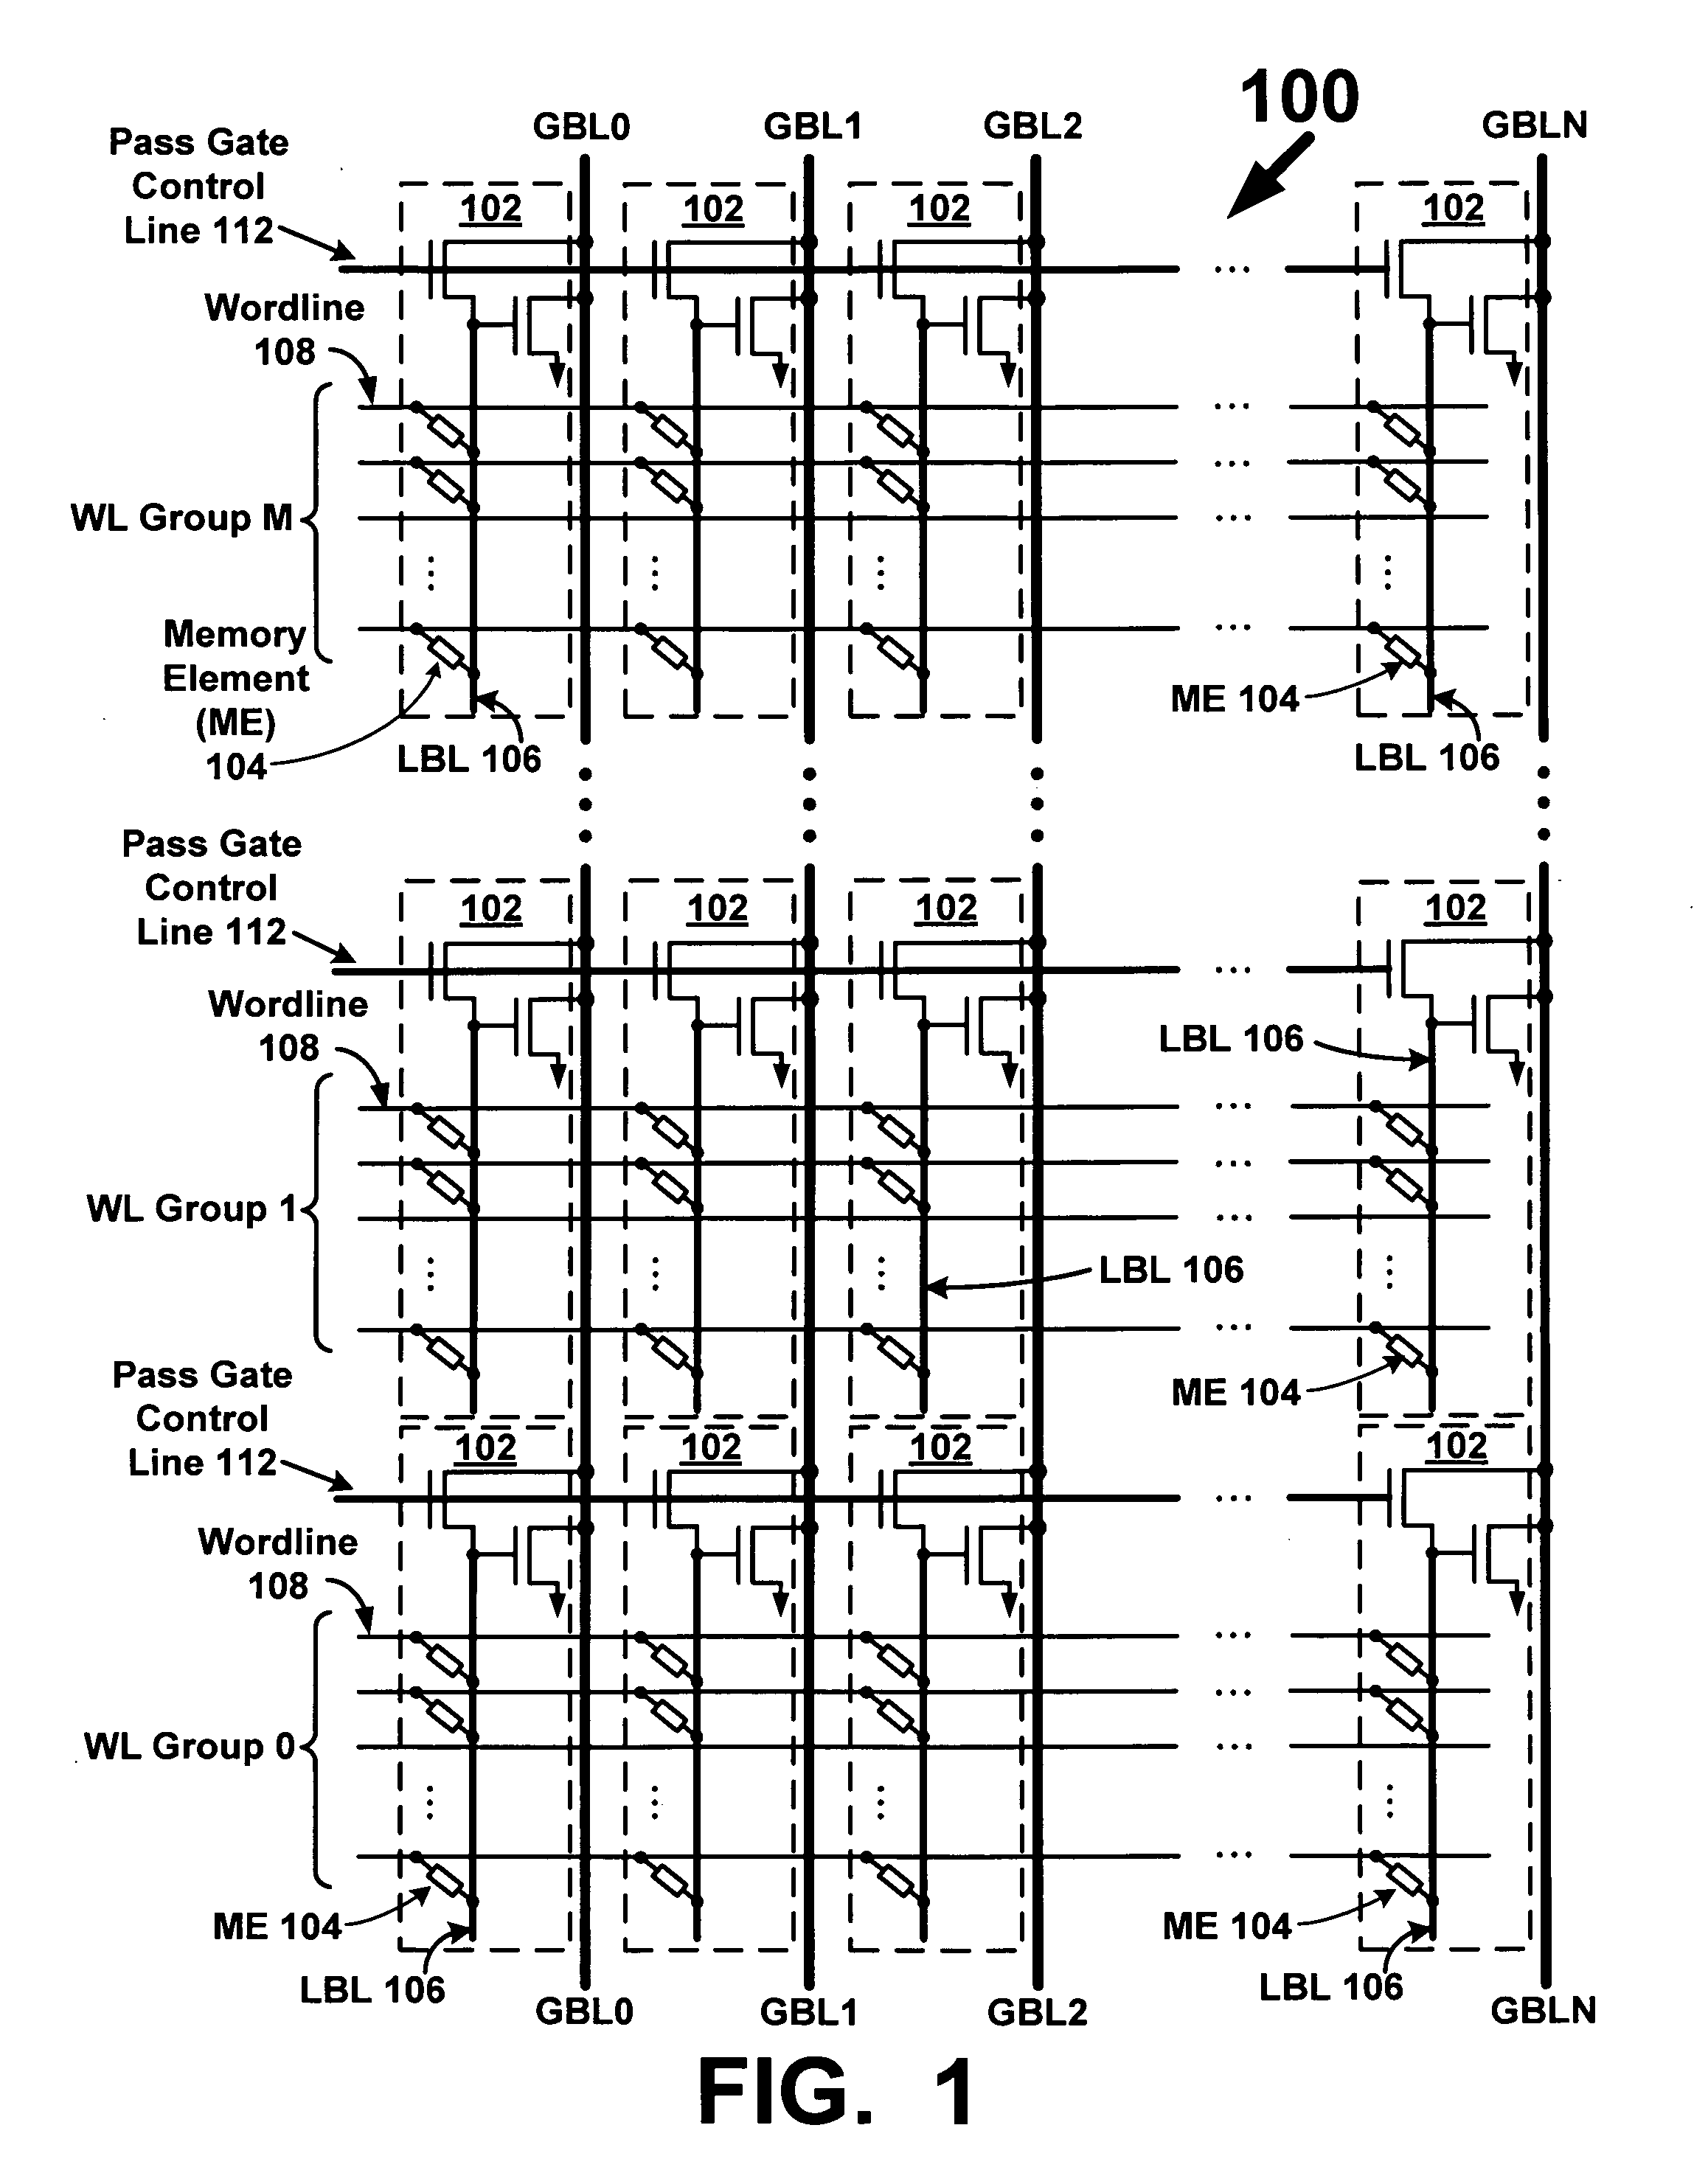 Memory array with local bitlines and local-to-global bitline pass gates and gain stages